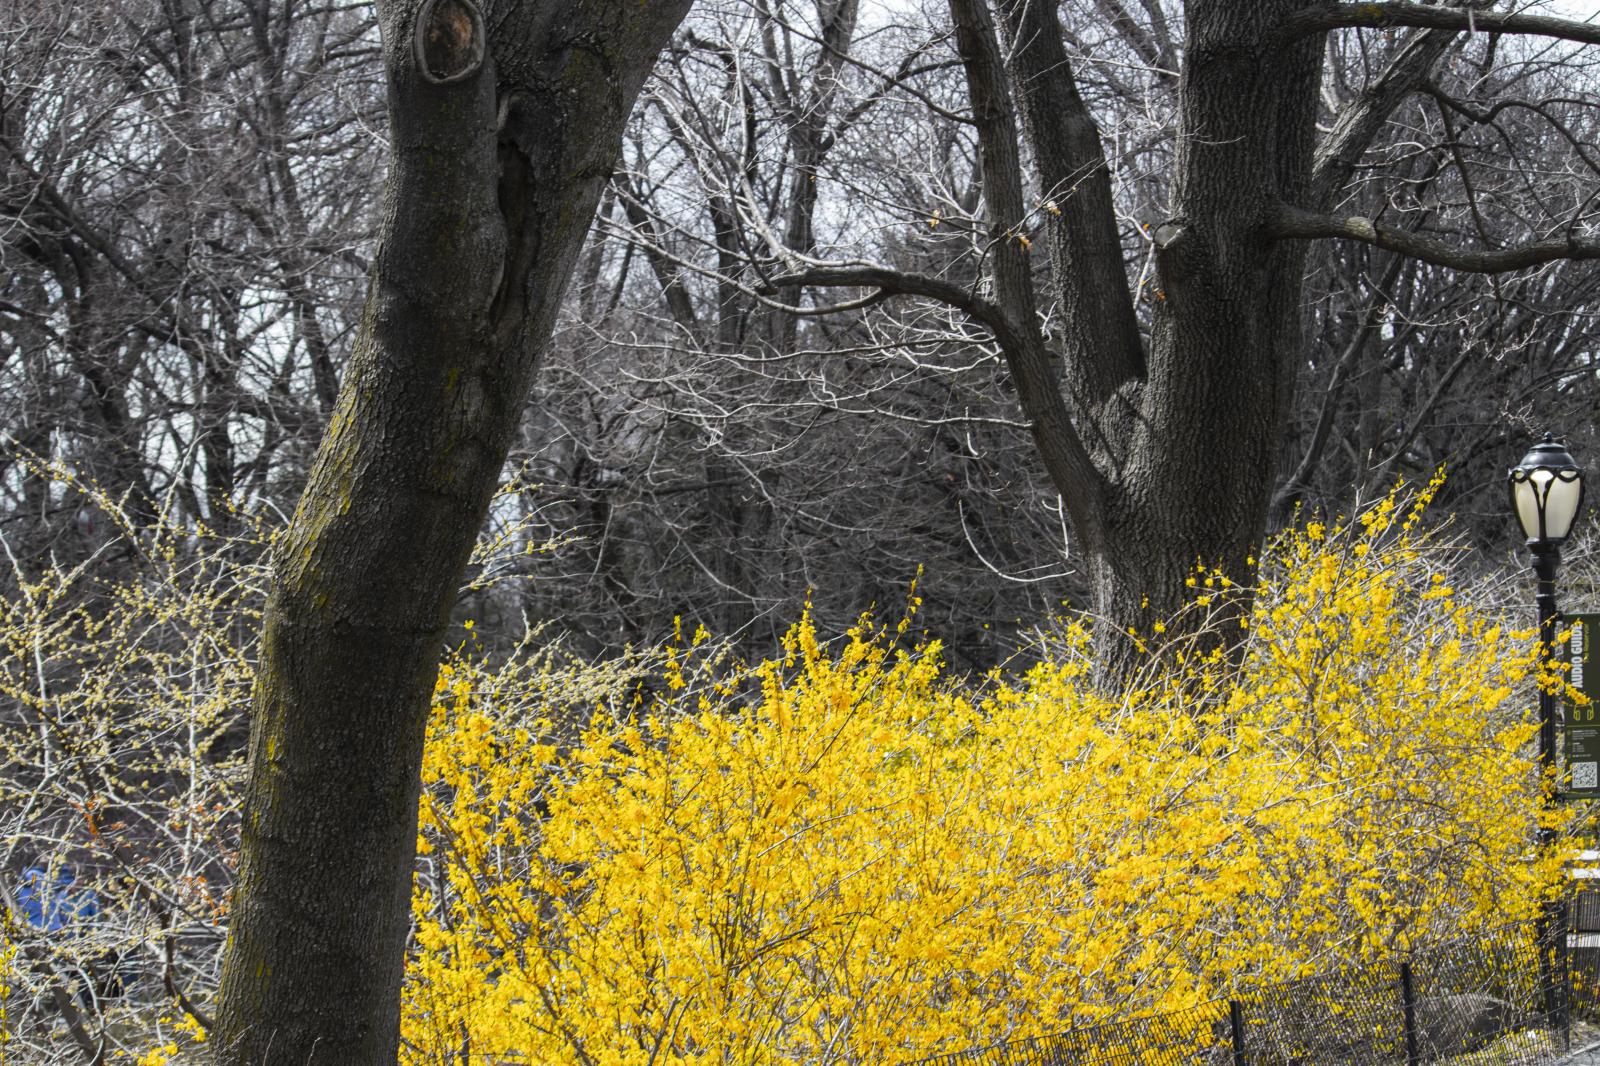 Early Spring in Central Park